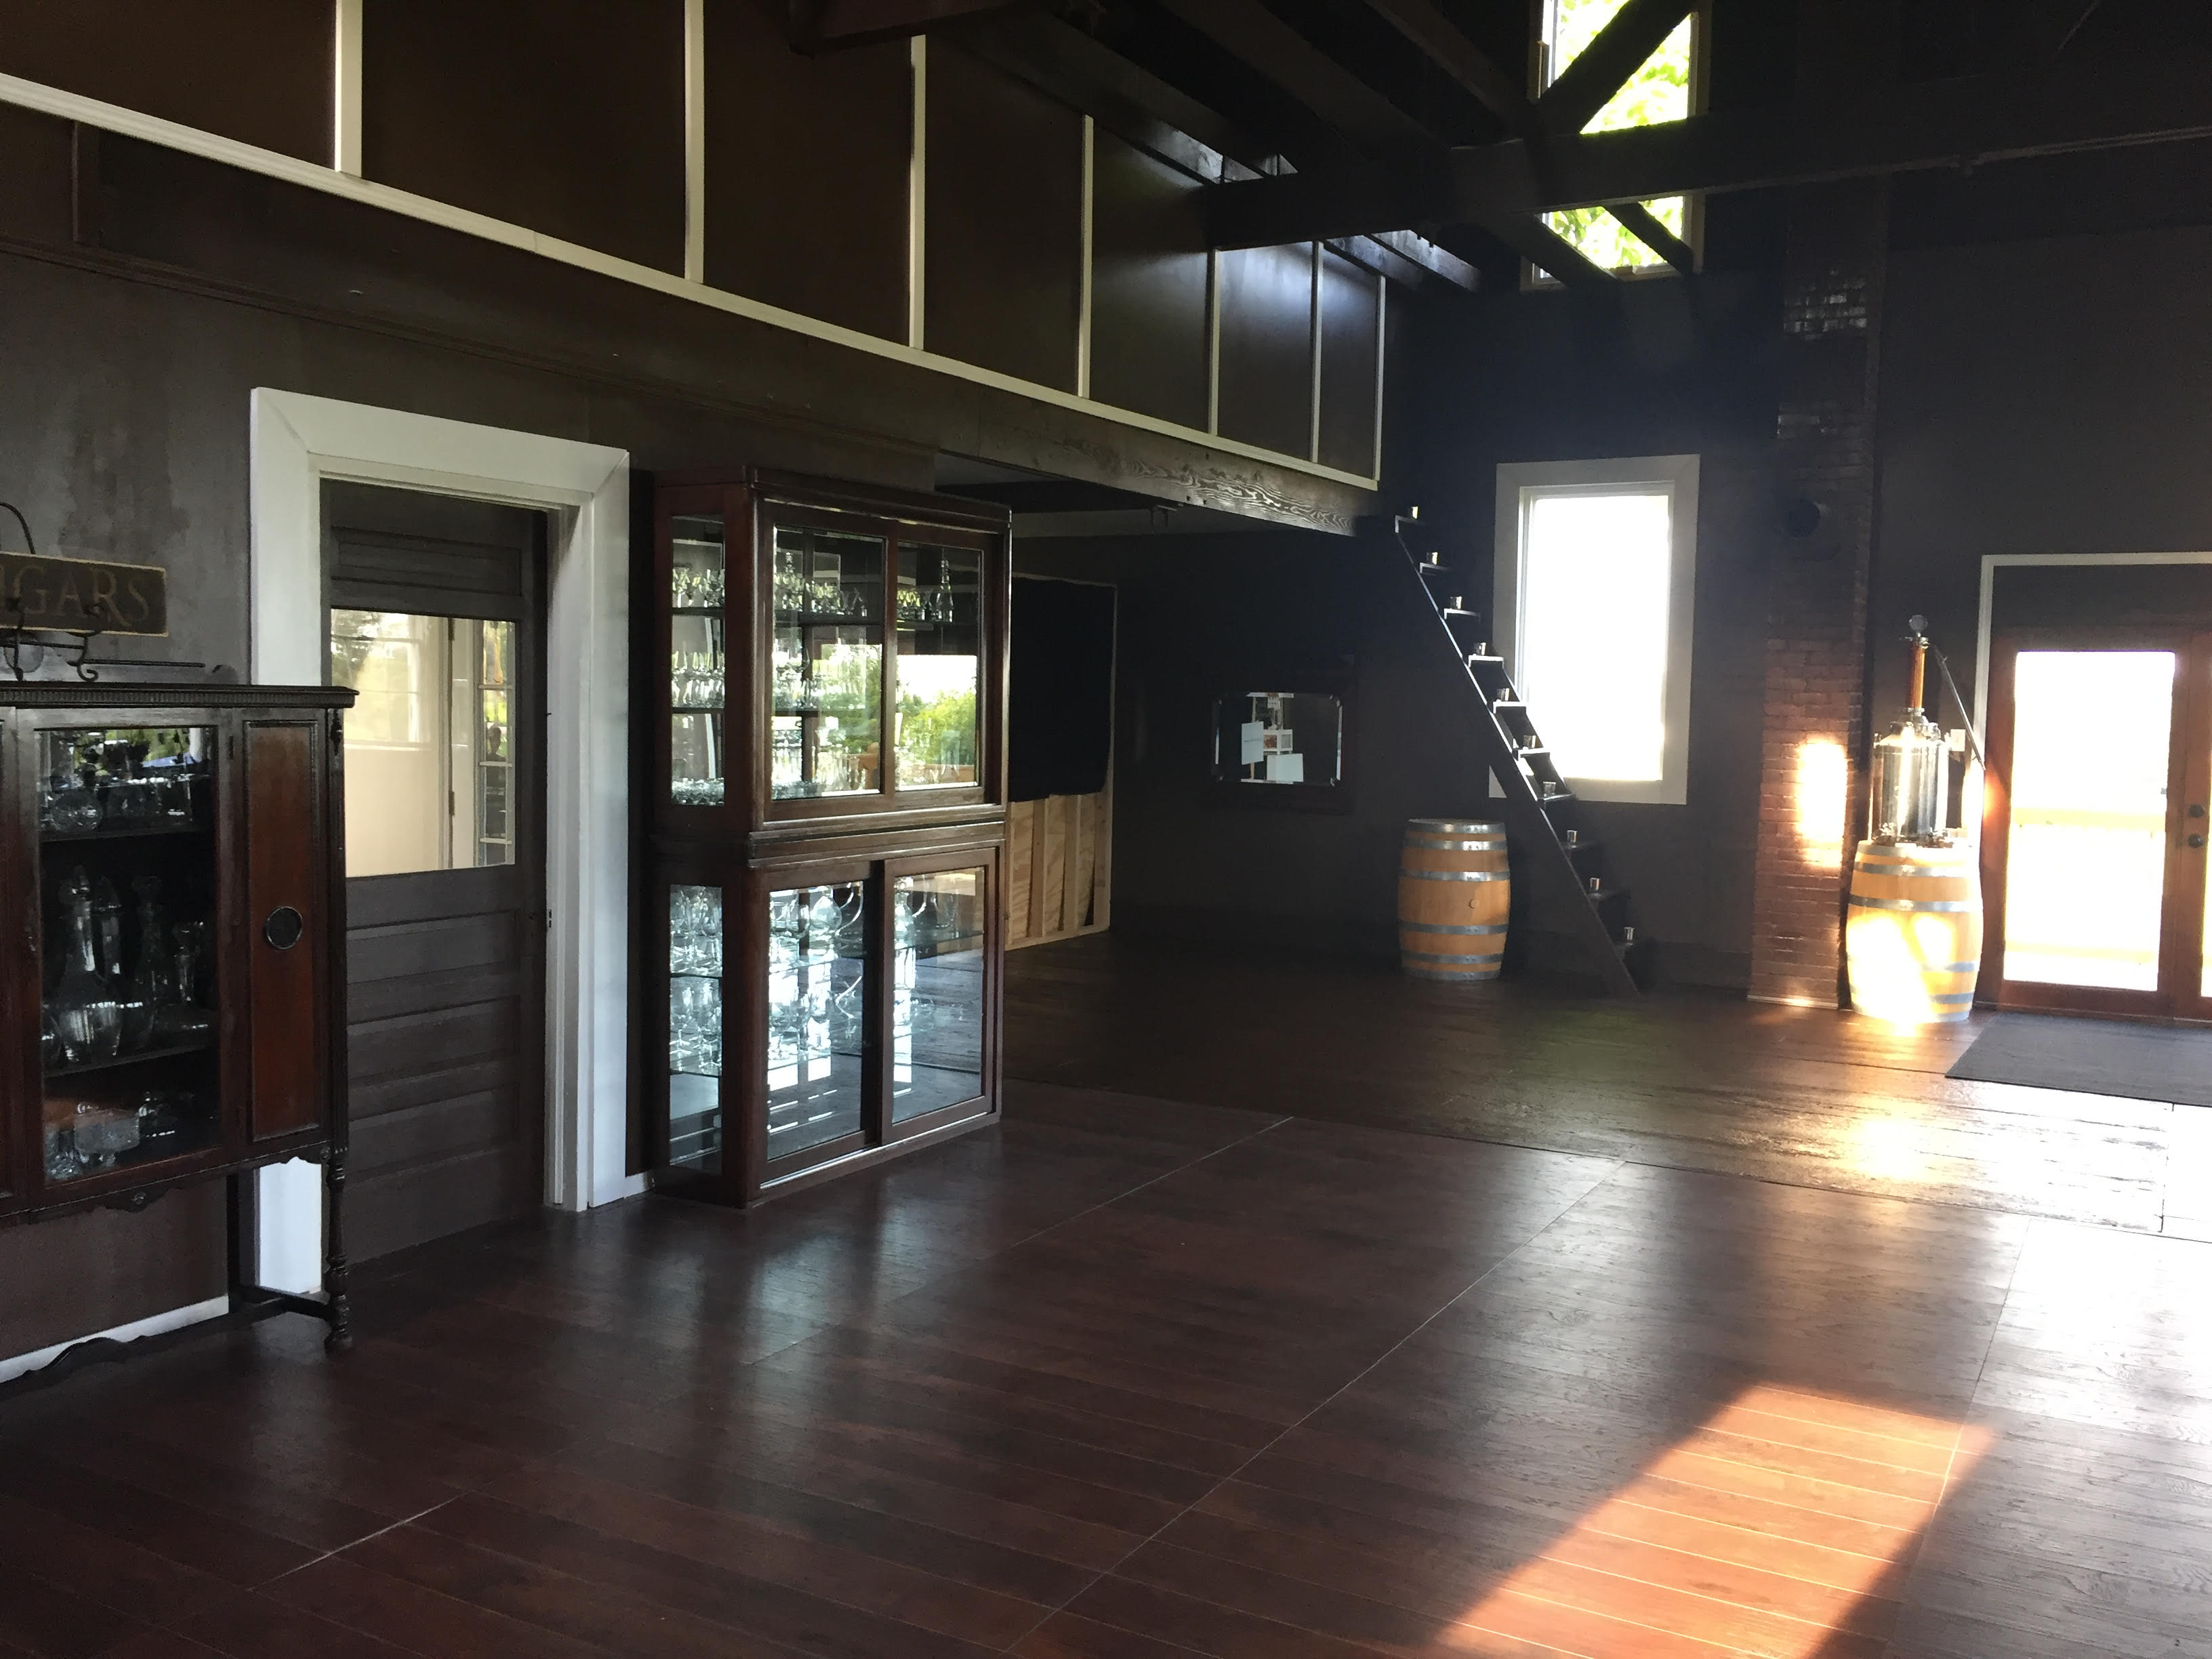 Holy Grail Winery & Vineyard- Brown room with glass cabinets with stairs leading up